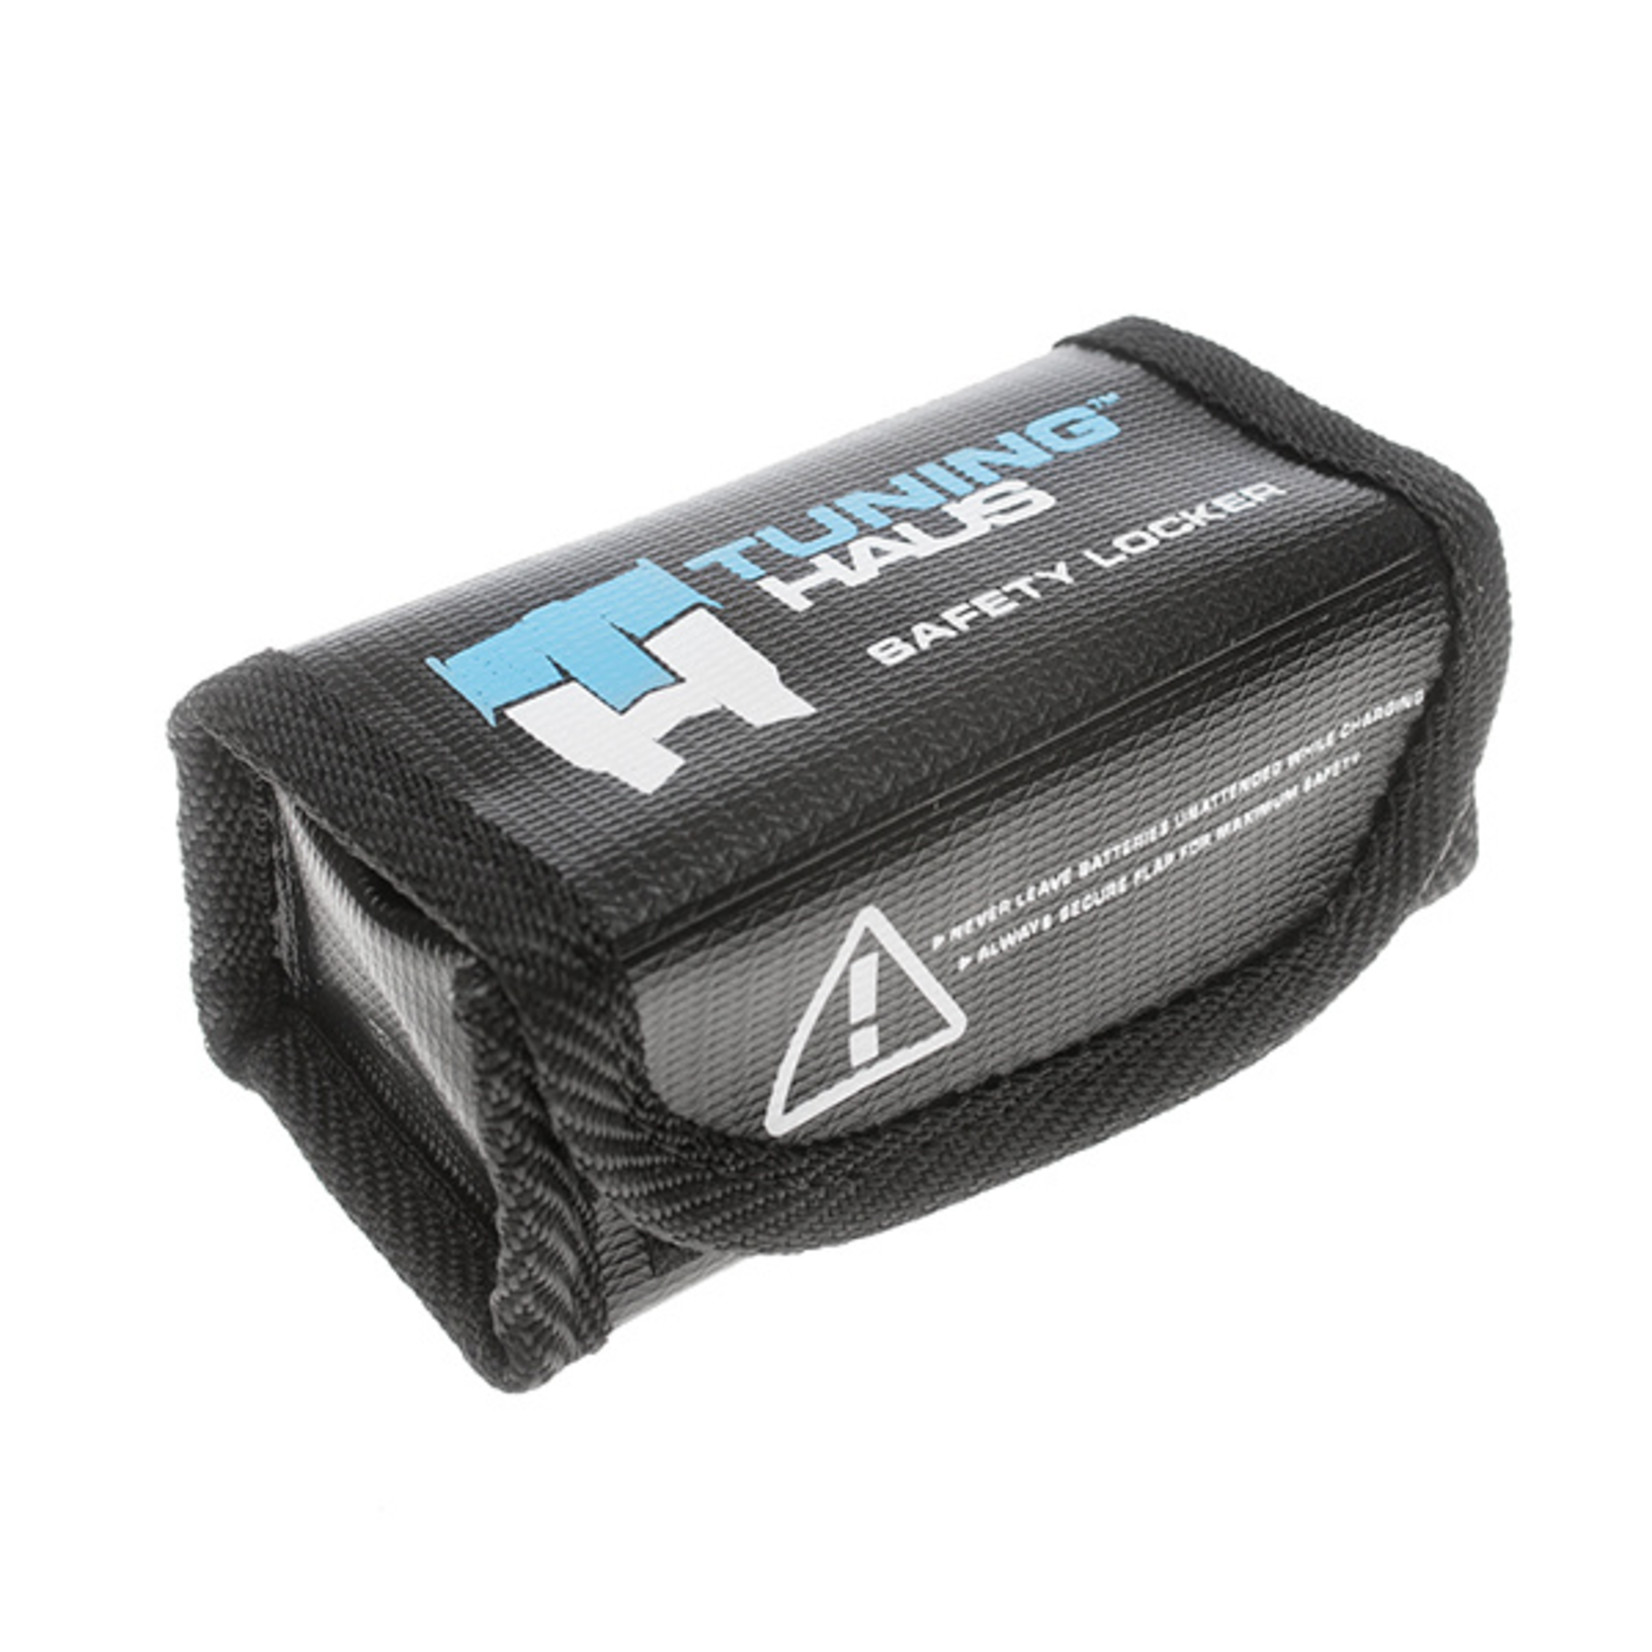 Tuning Haus TUH1003 - 1S or 2S Shorty Lipo Safety Storage Bag